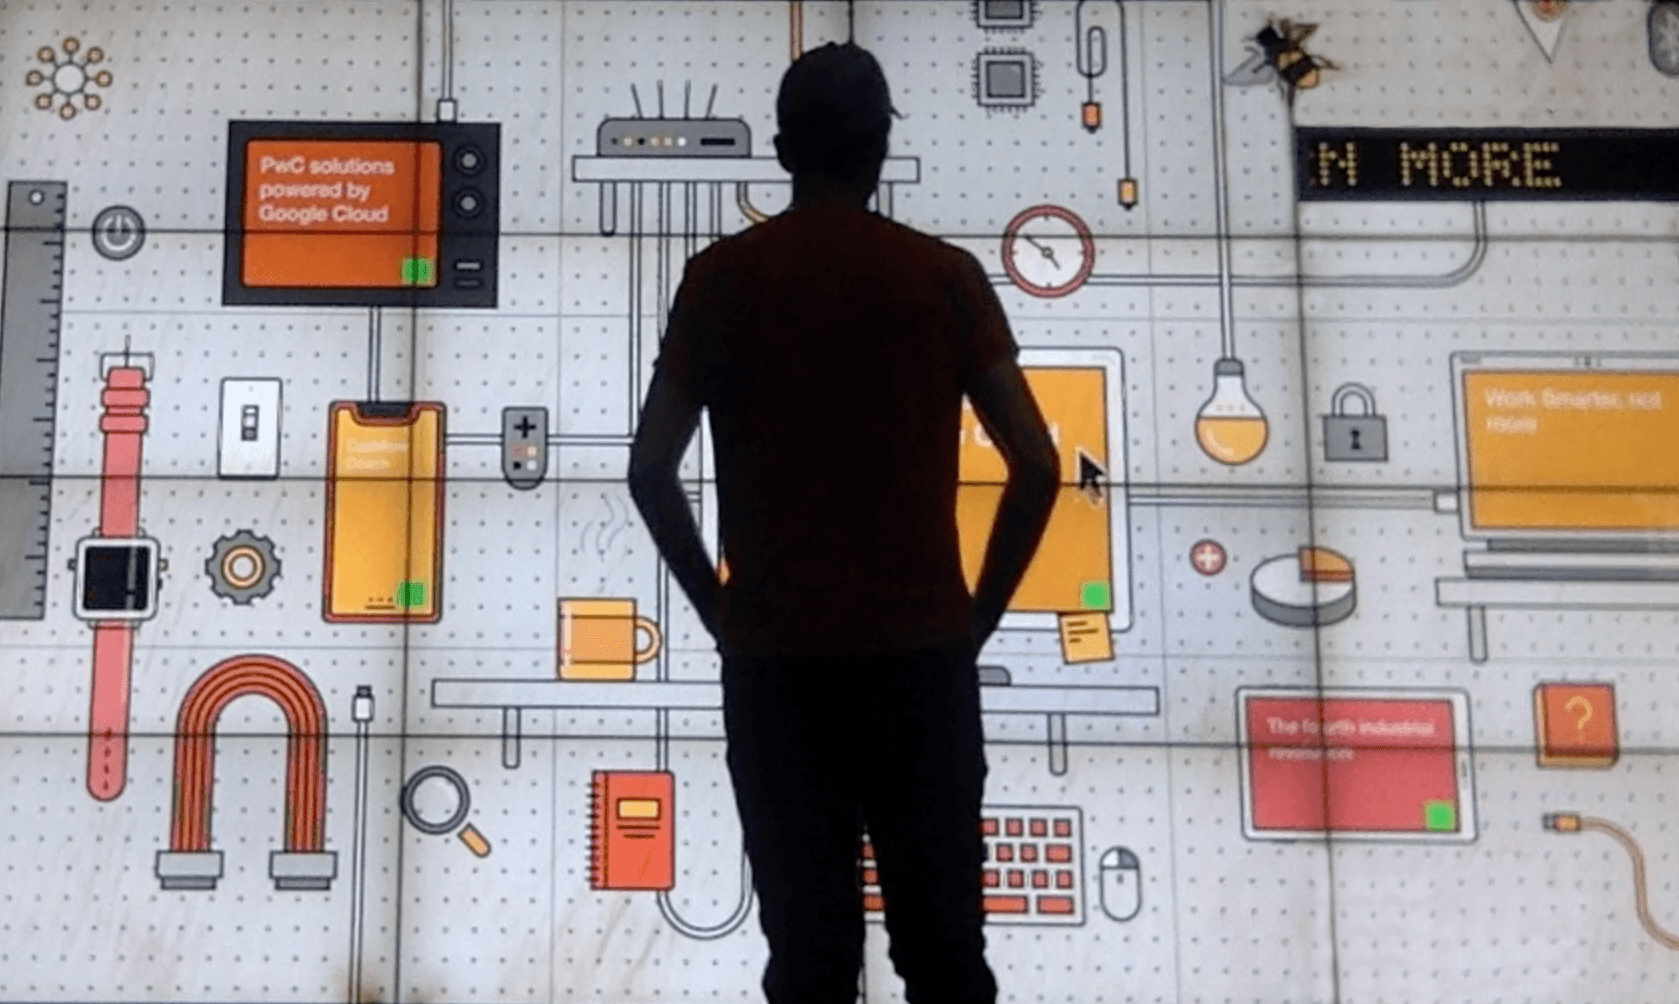 Man standing in front of giant screen with interactive items on it.